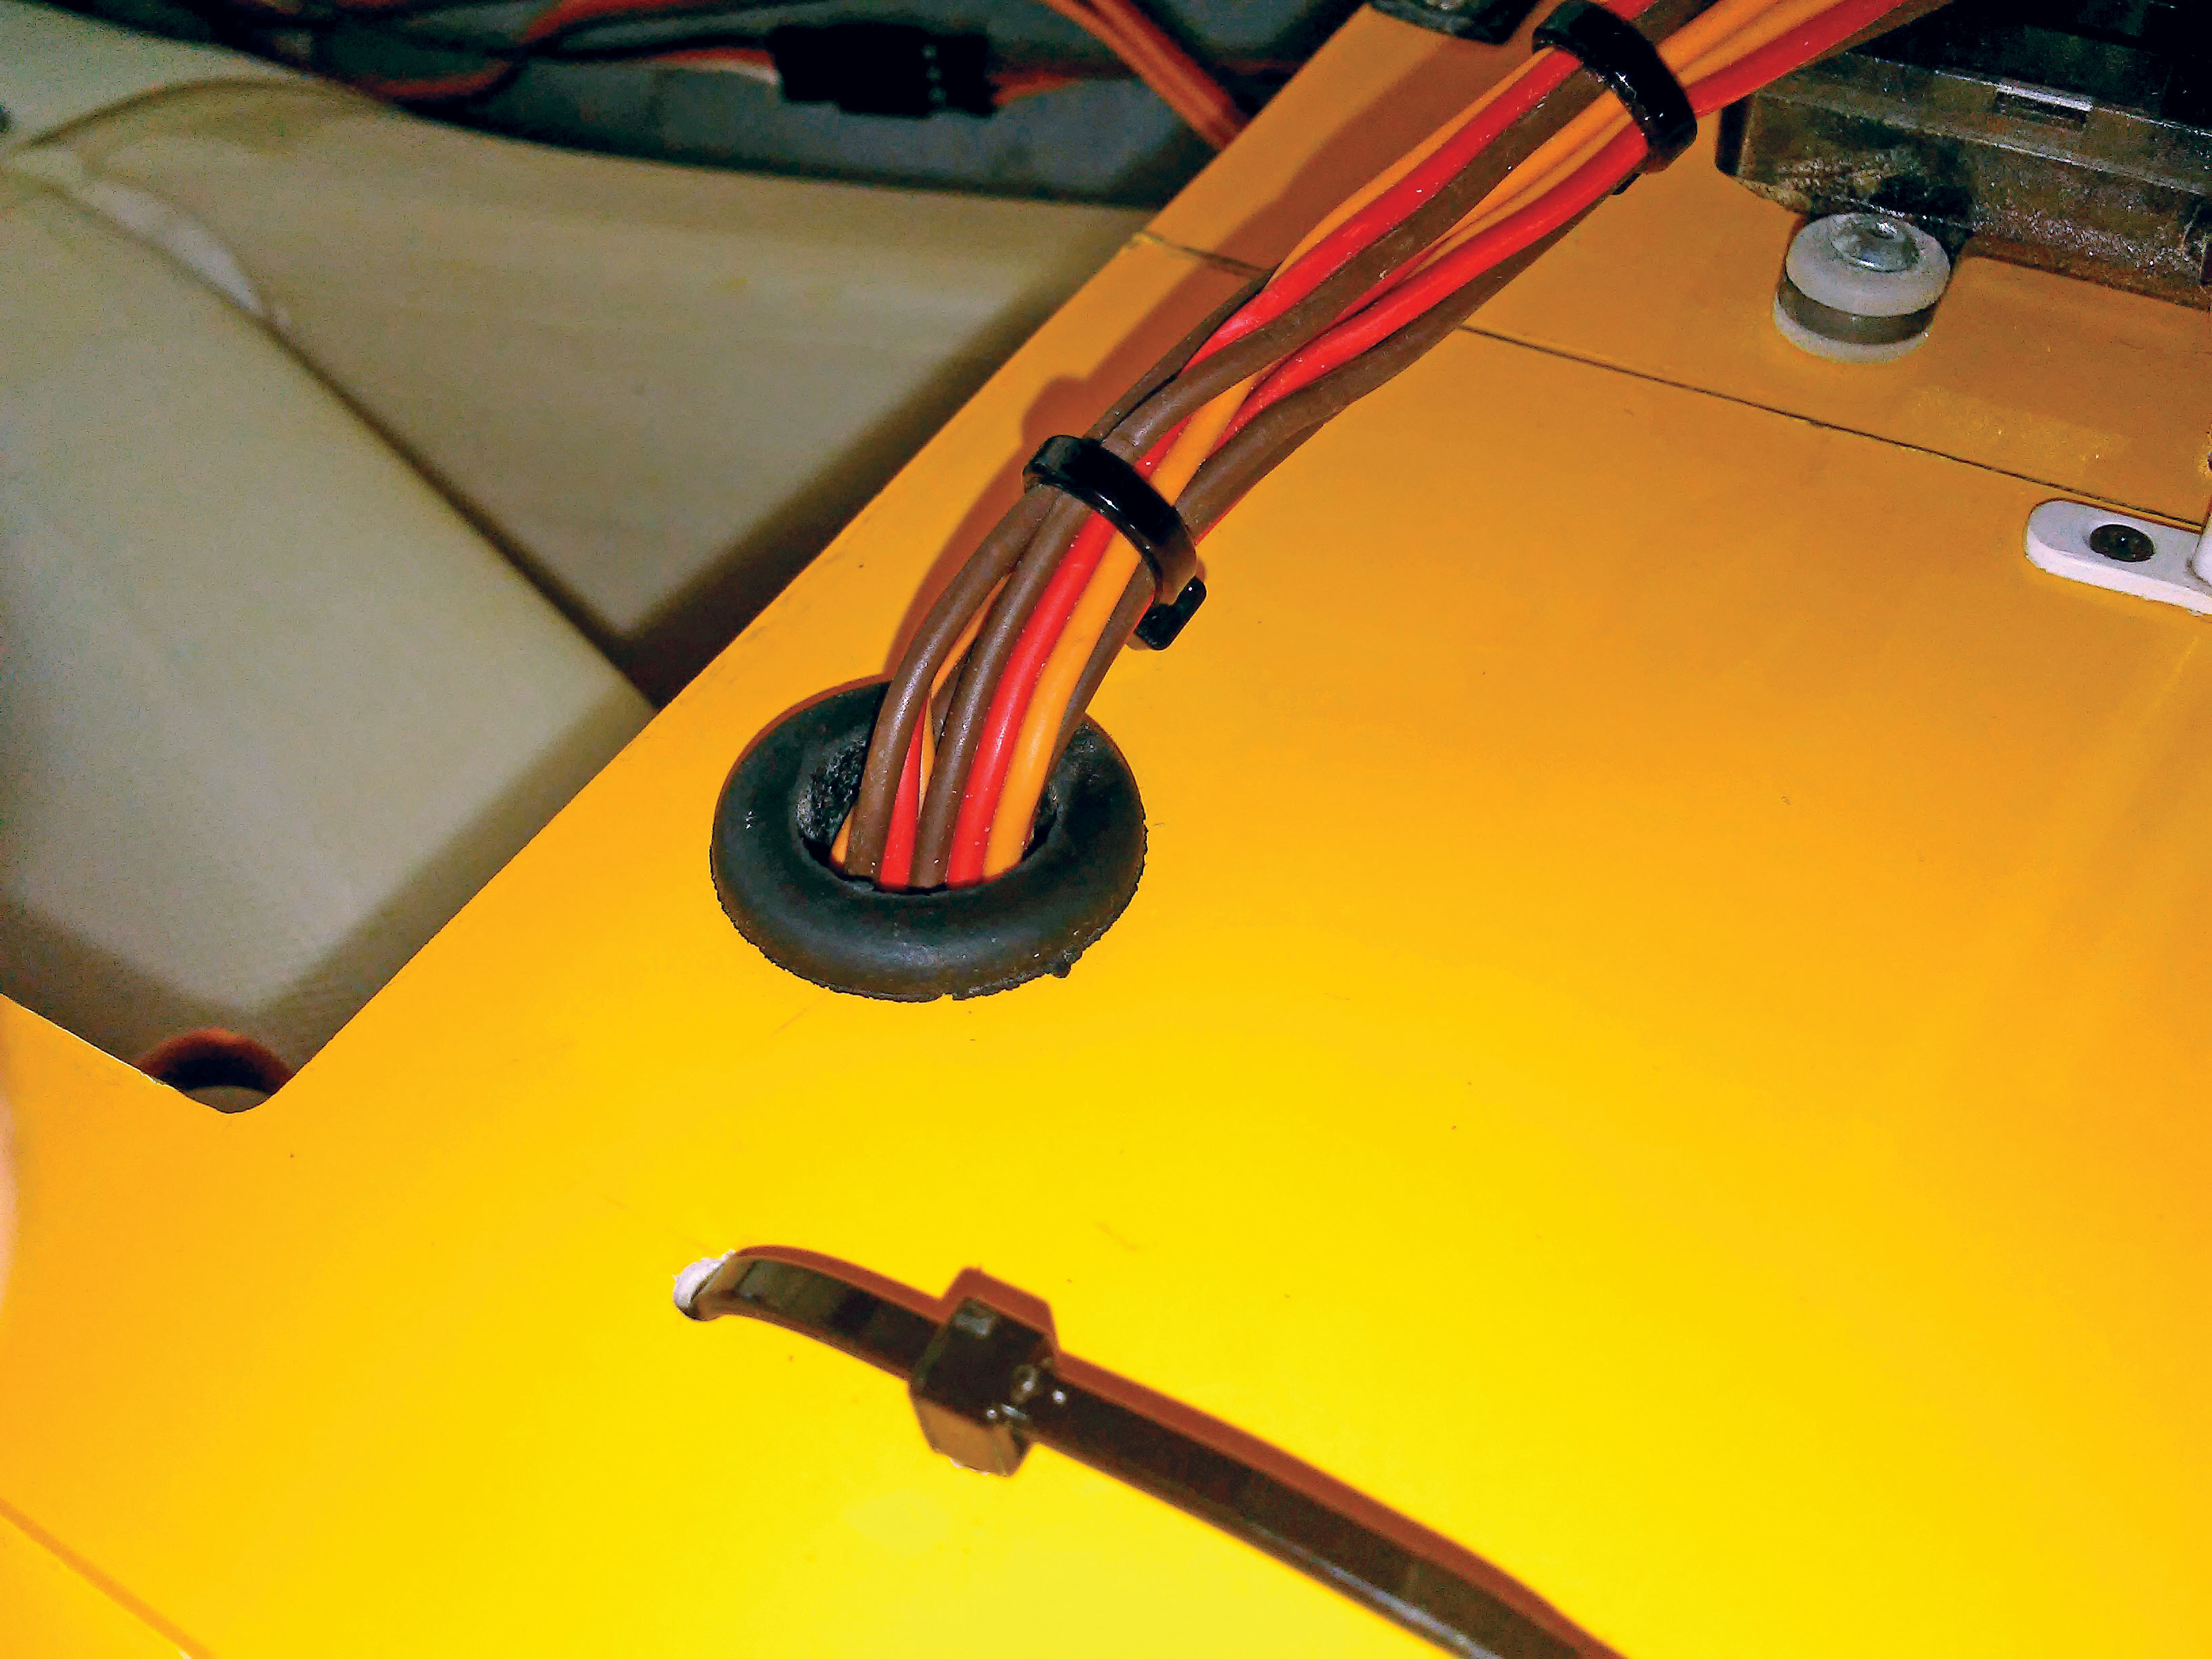 this is an example of how to clean up your servo harness by using a simple hardware store grommet that protects the servo extensions from the abrasive fiberglass